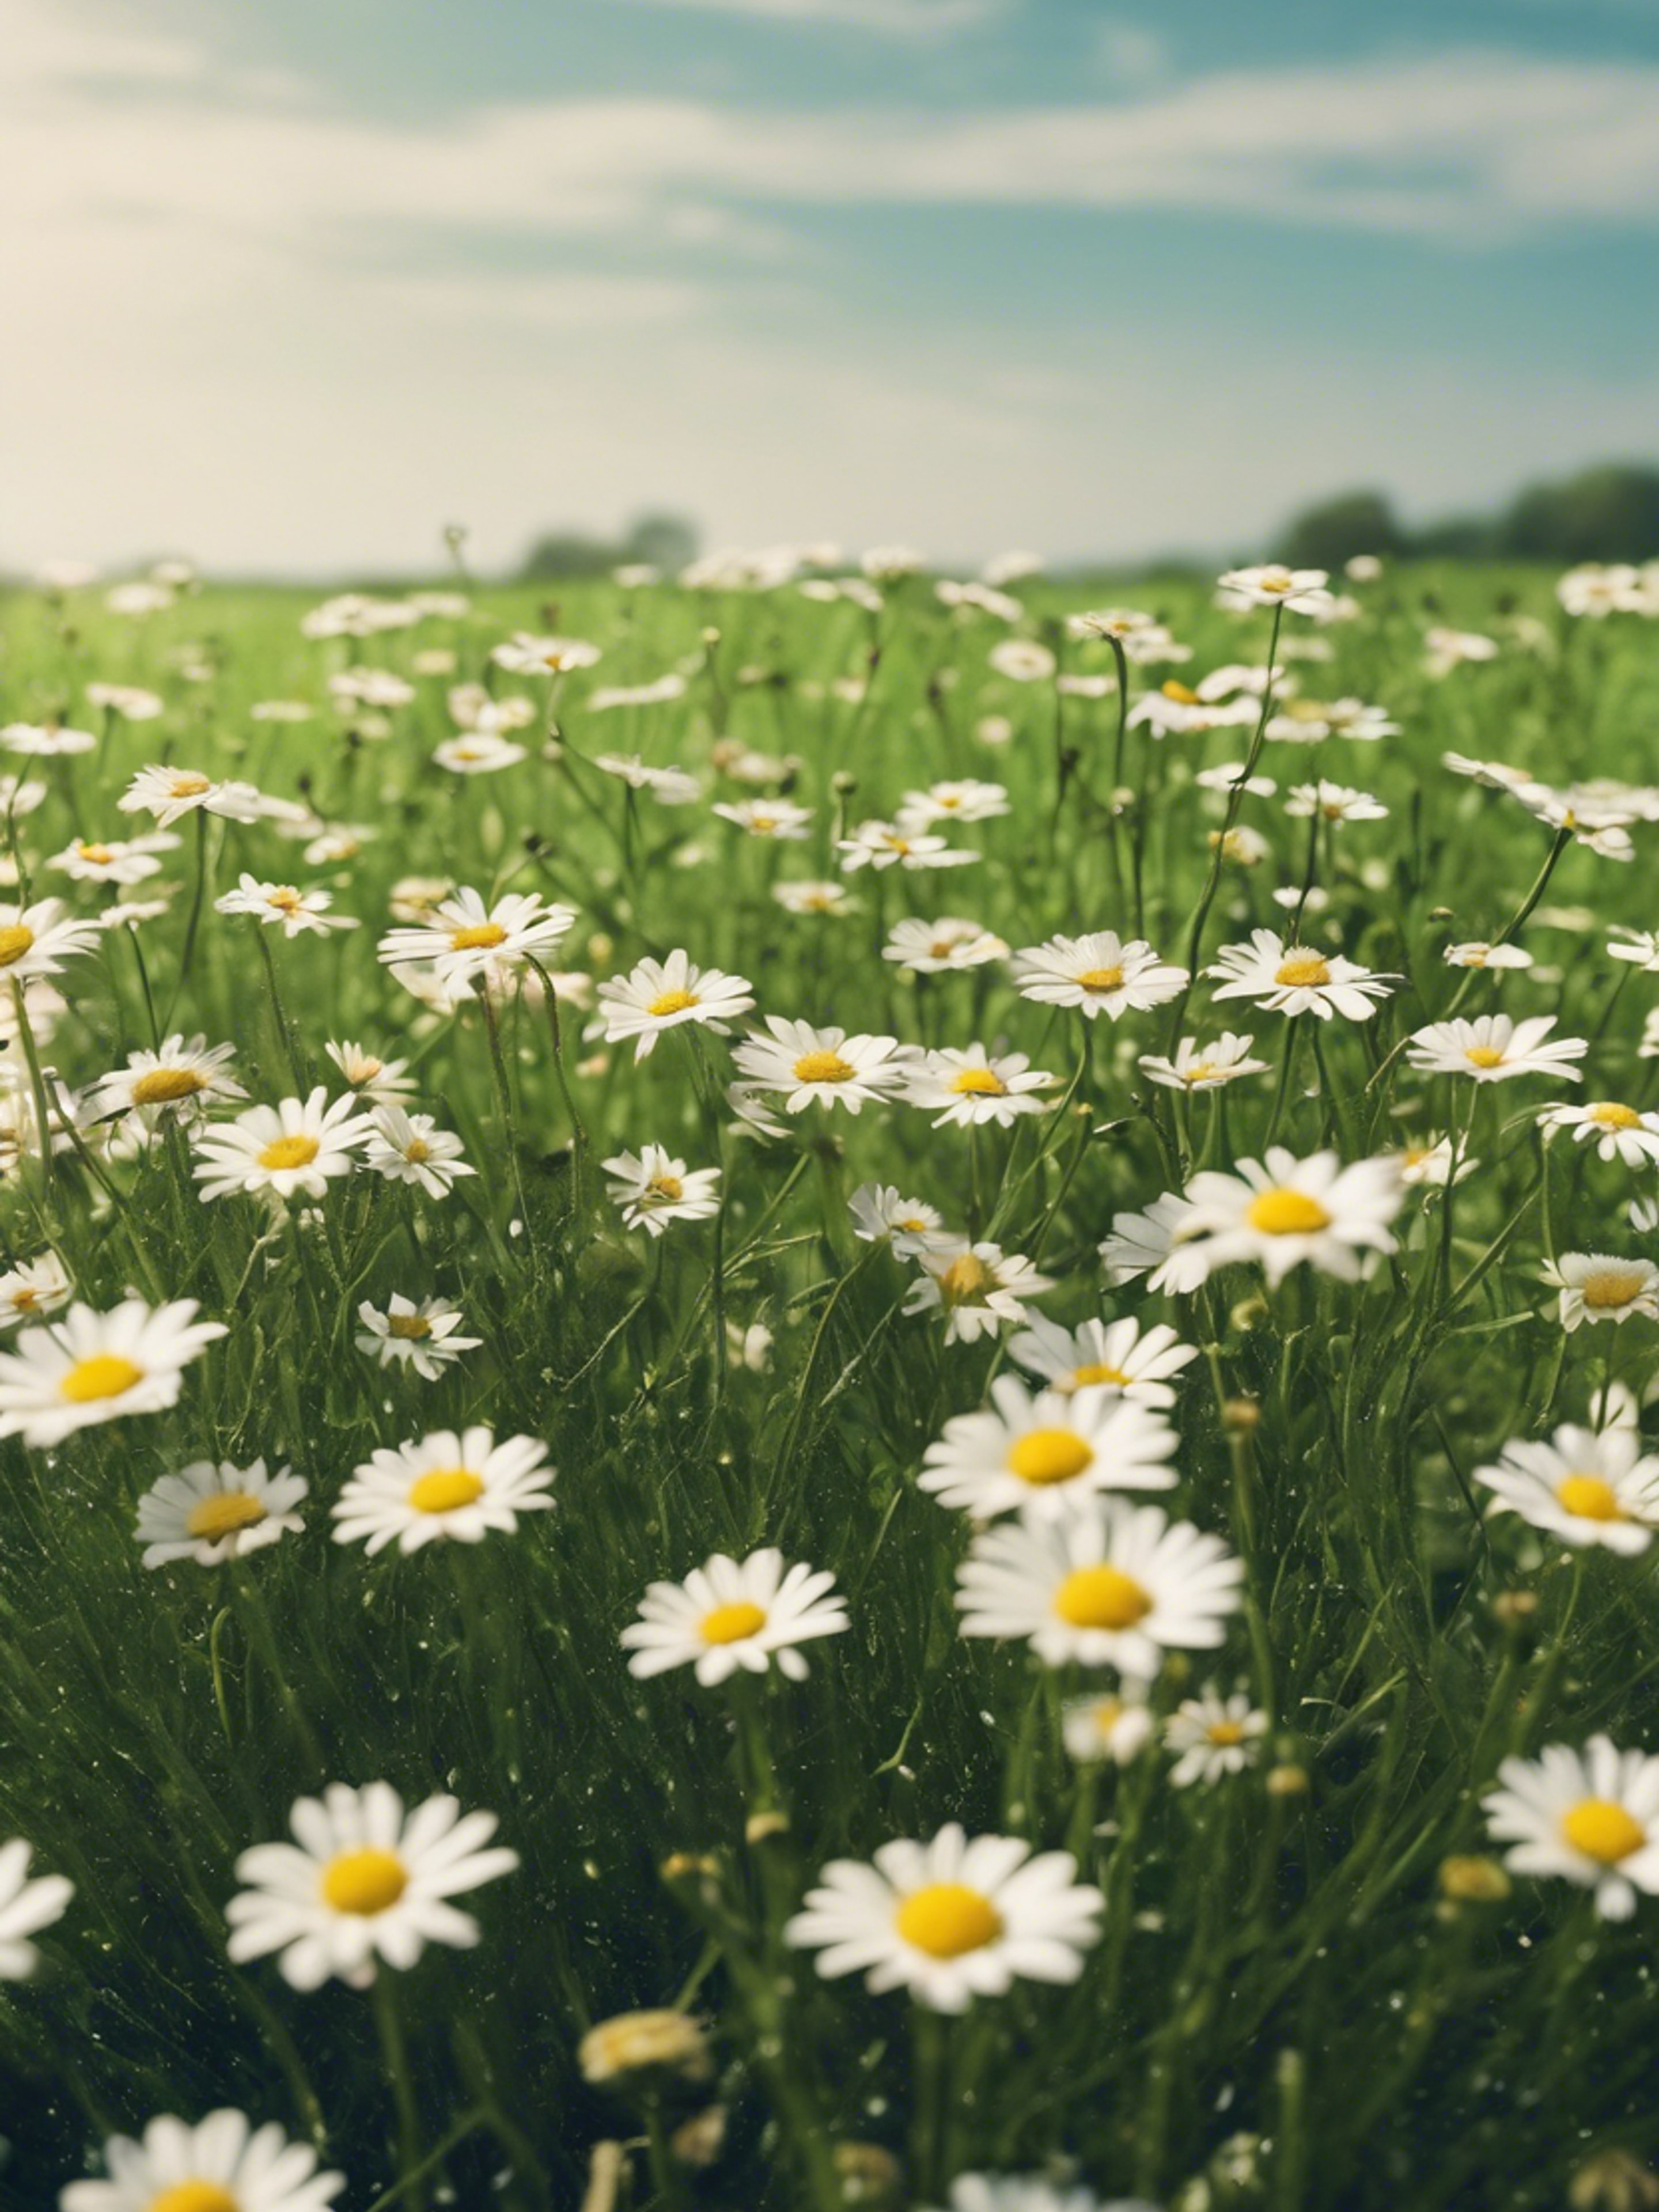 A cool green field sprinkled with daisies under a morning sky.壁紙[e270184600e04e908453]